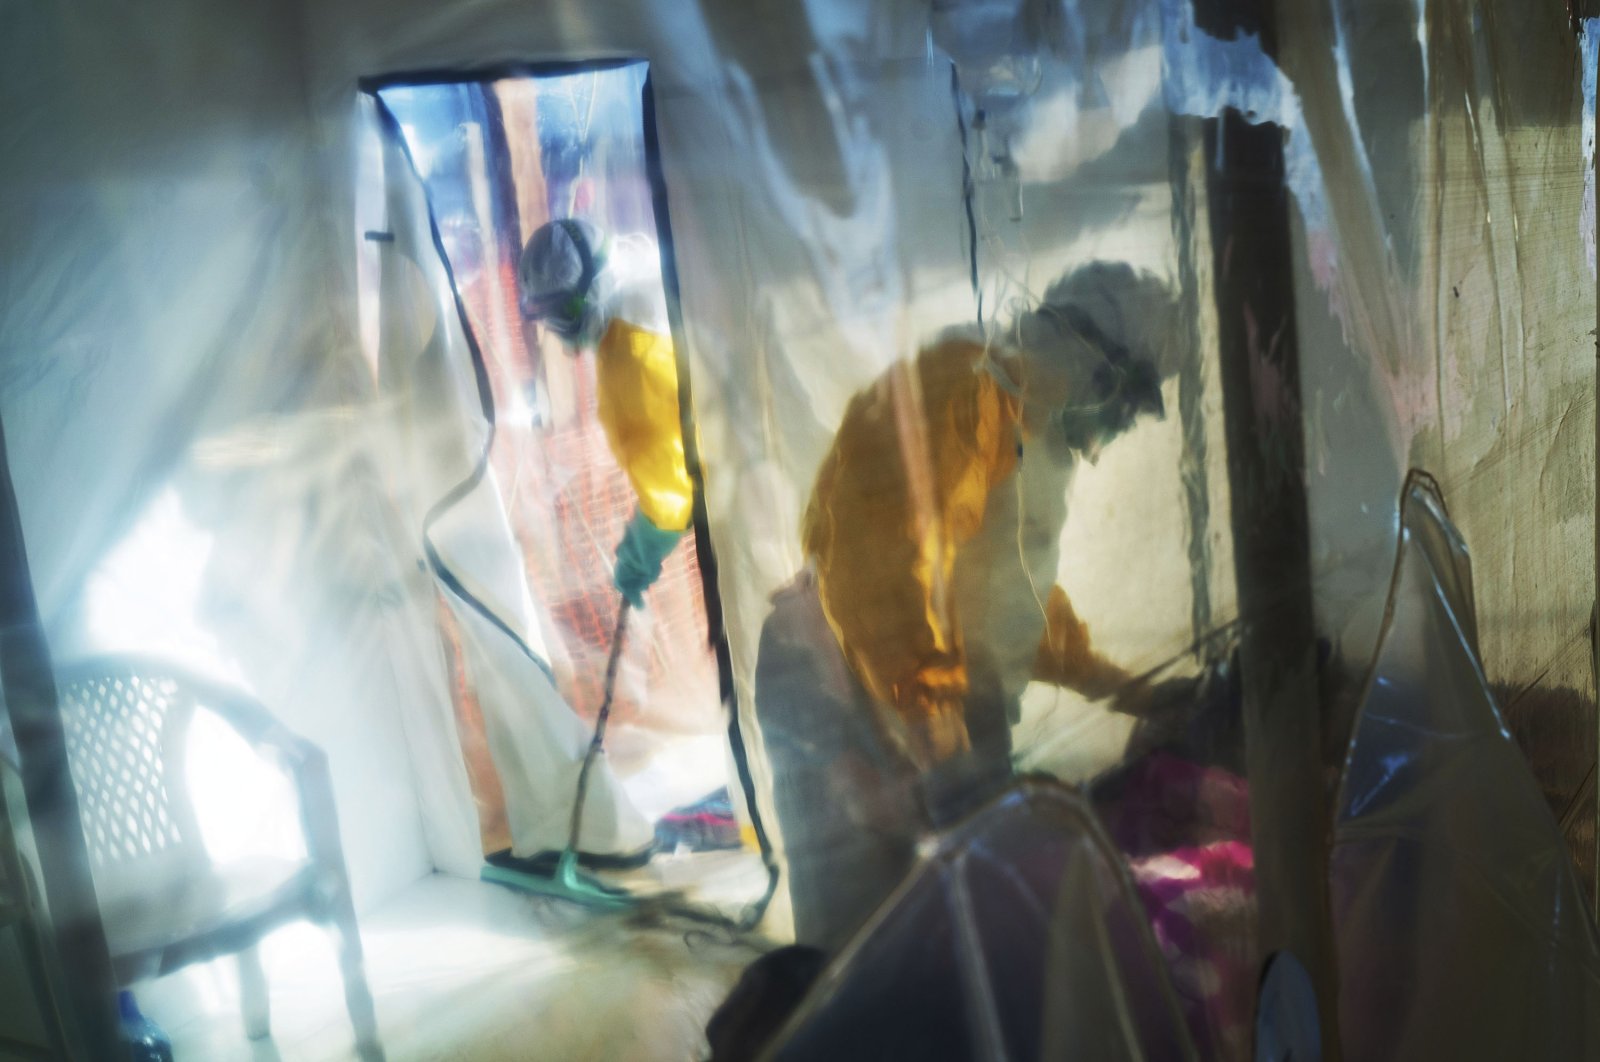 Health workers wearing protective suits tend to to an Ebola victim kept in an isolation tent in Beni, Democratic Republic of Congo, July 13, 2019. (AP Photo)